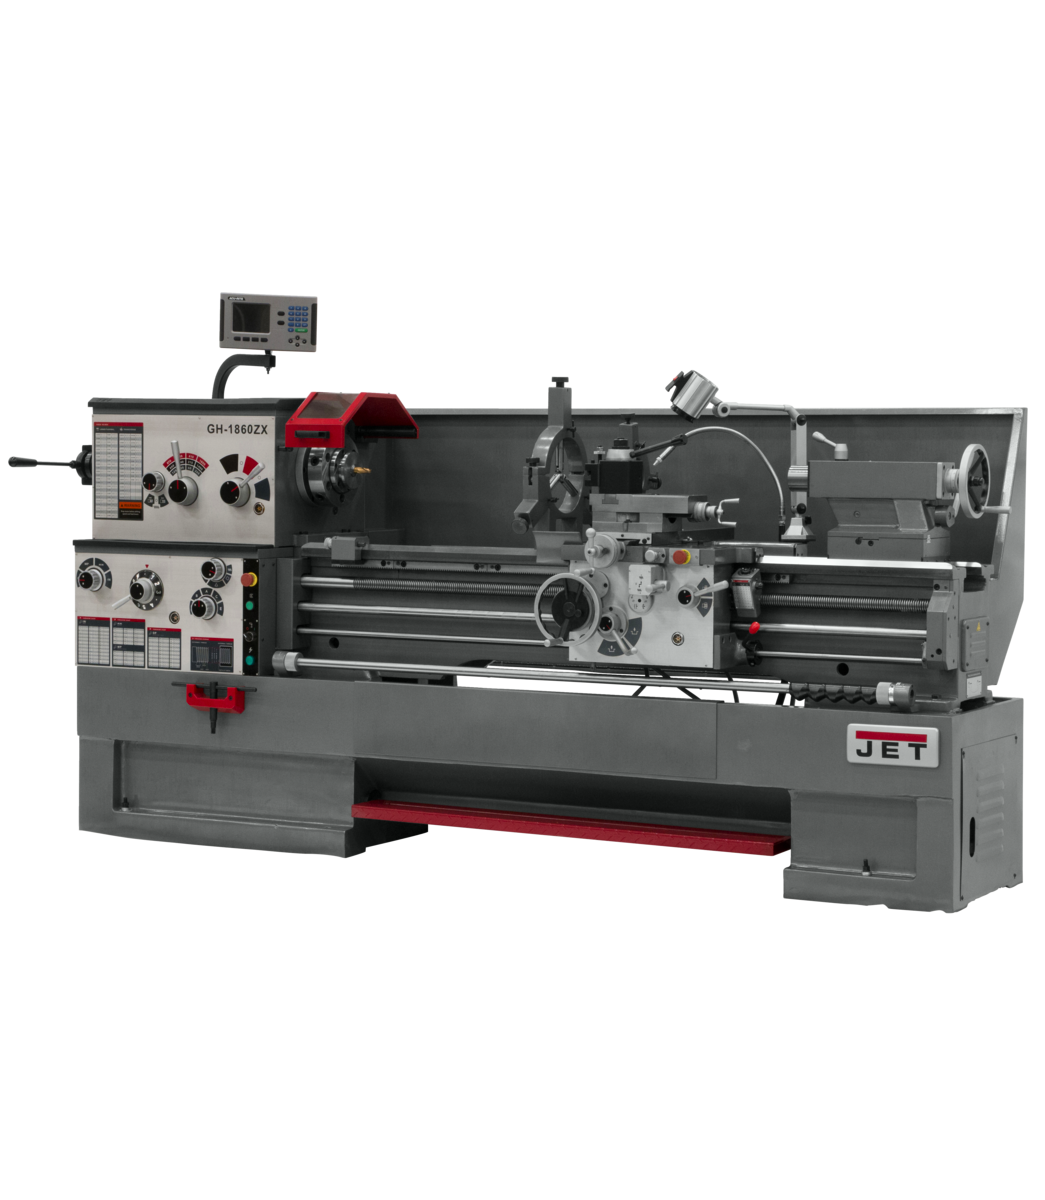 321593, GH-1860ZX , 18" Swing, 60" Between Centers, GH-1860ZX With ACU-RITE 303 DRO With Taper Attachment and Collet Closer installed, Jet, Metalworking, Turning, Lathes